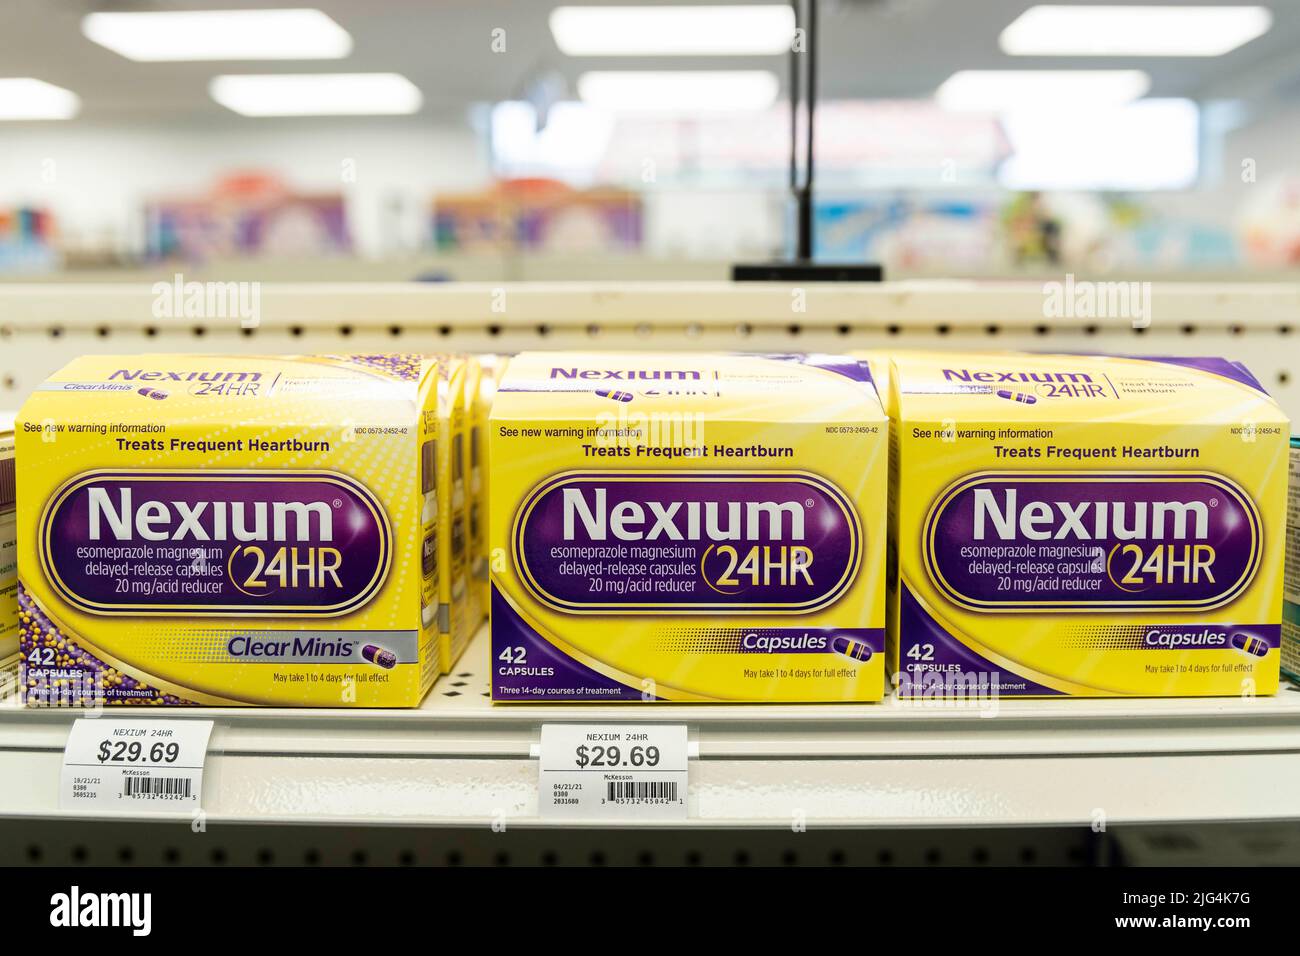 Boxes of Nexium brand heartburn medications sit on the shelf of a drug store Stock Photo